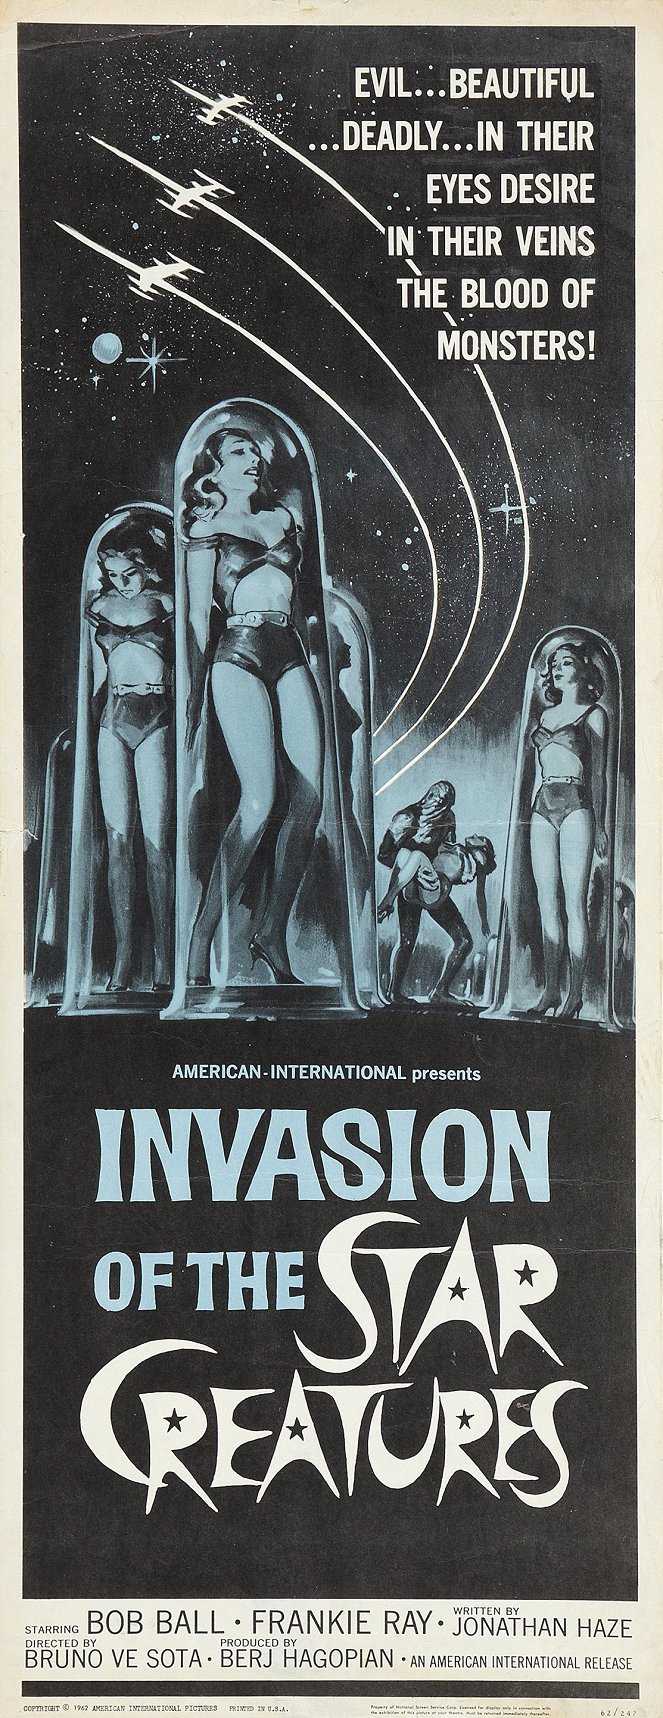 Invasion of the Star Creatures - Posters